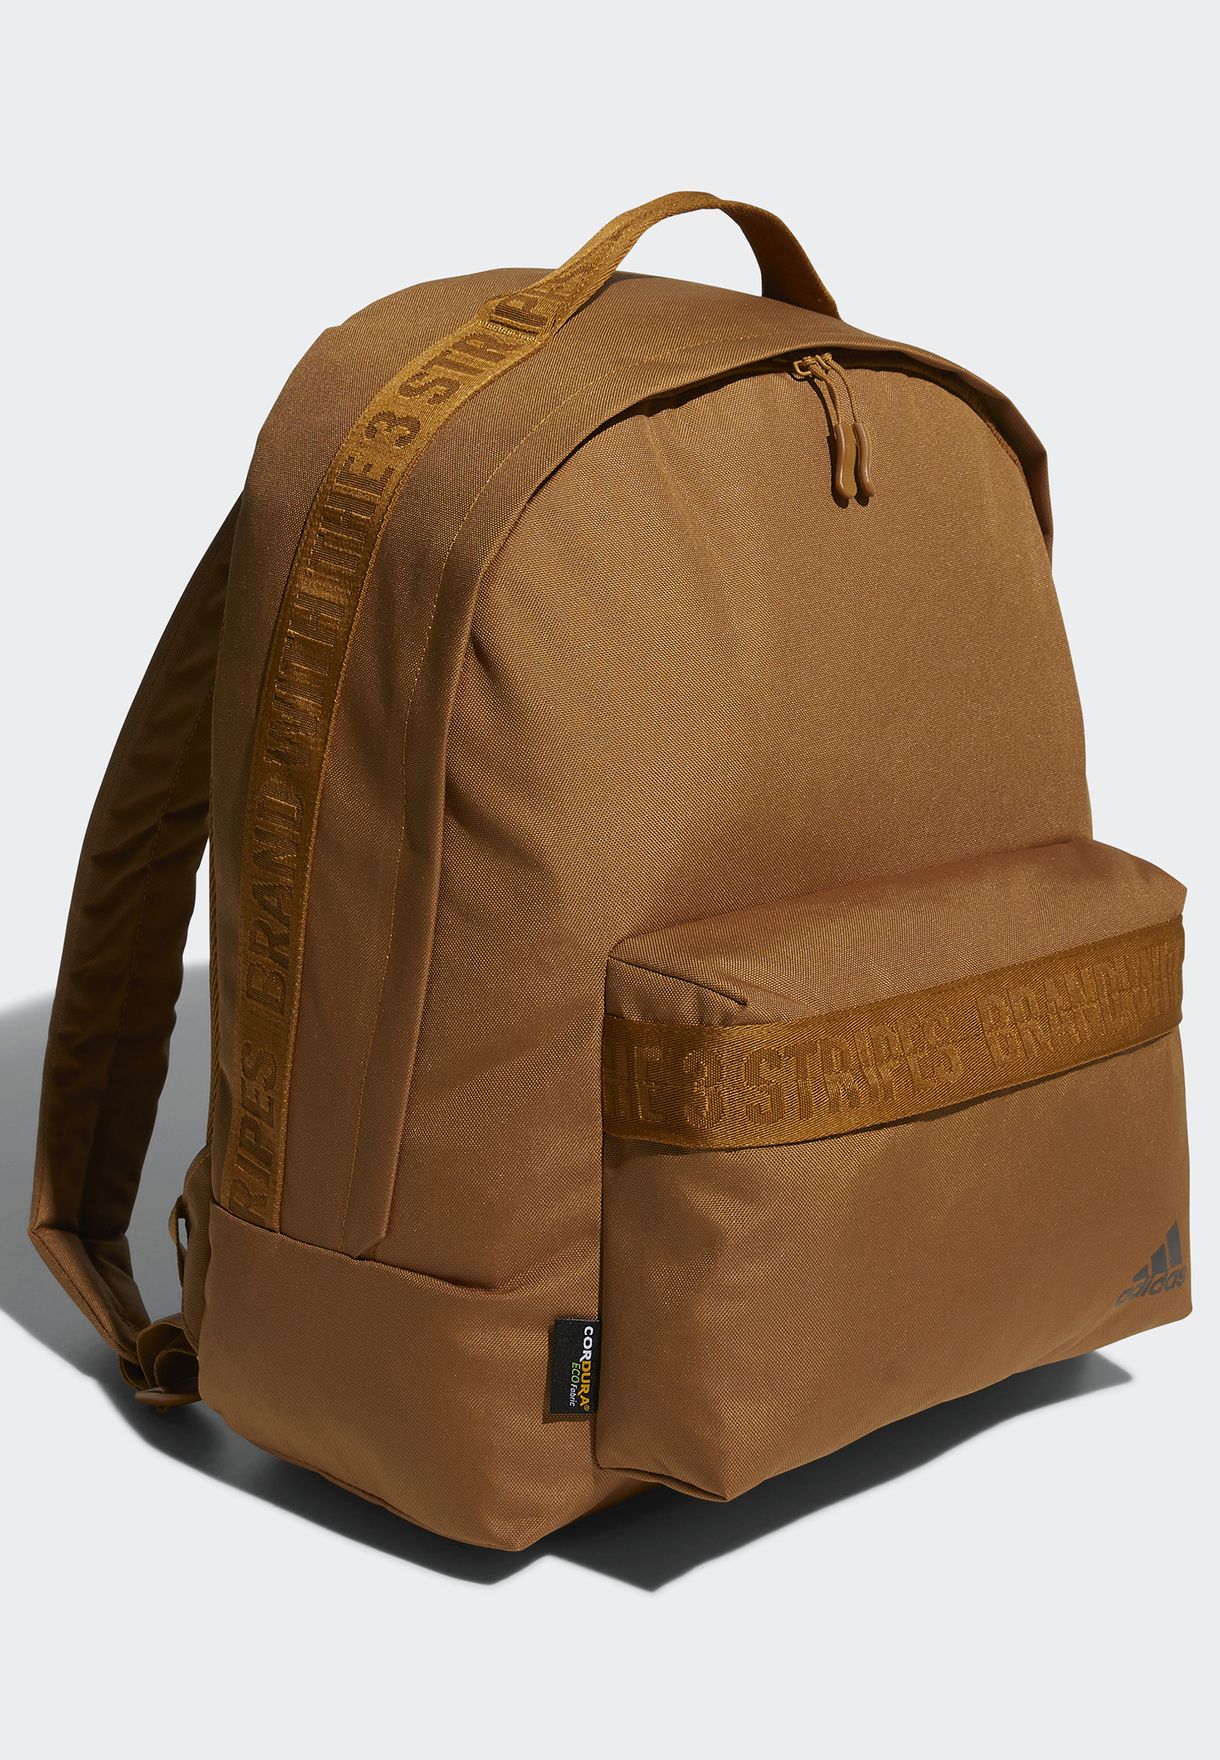 Must Haves Backpack